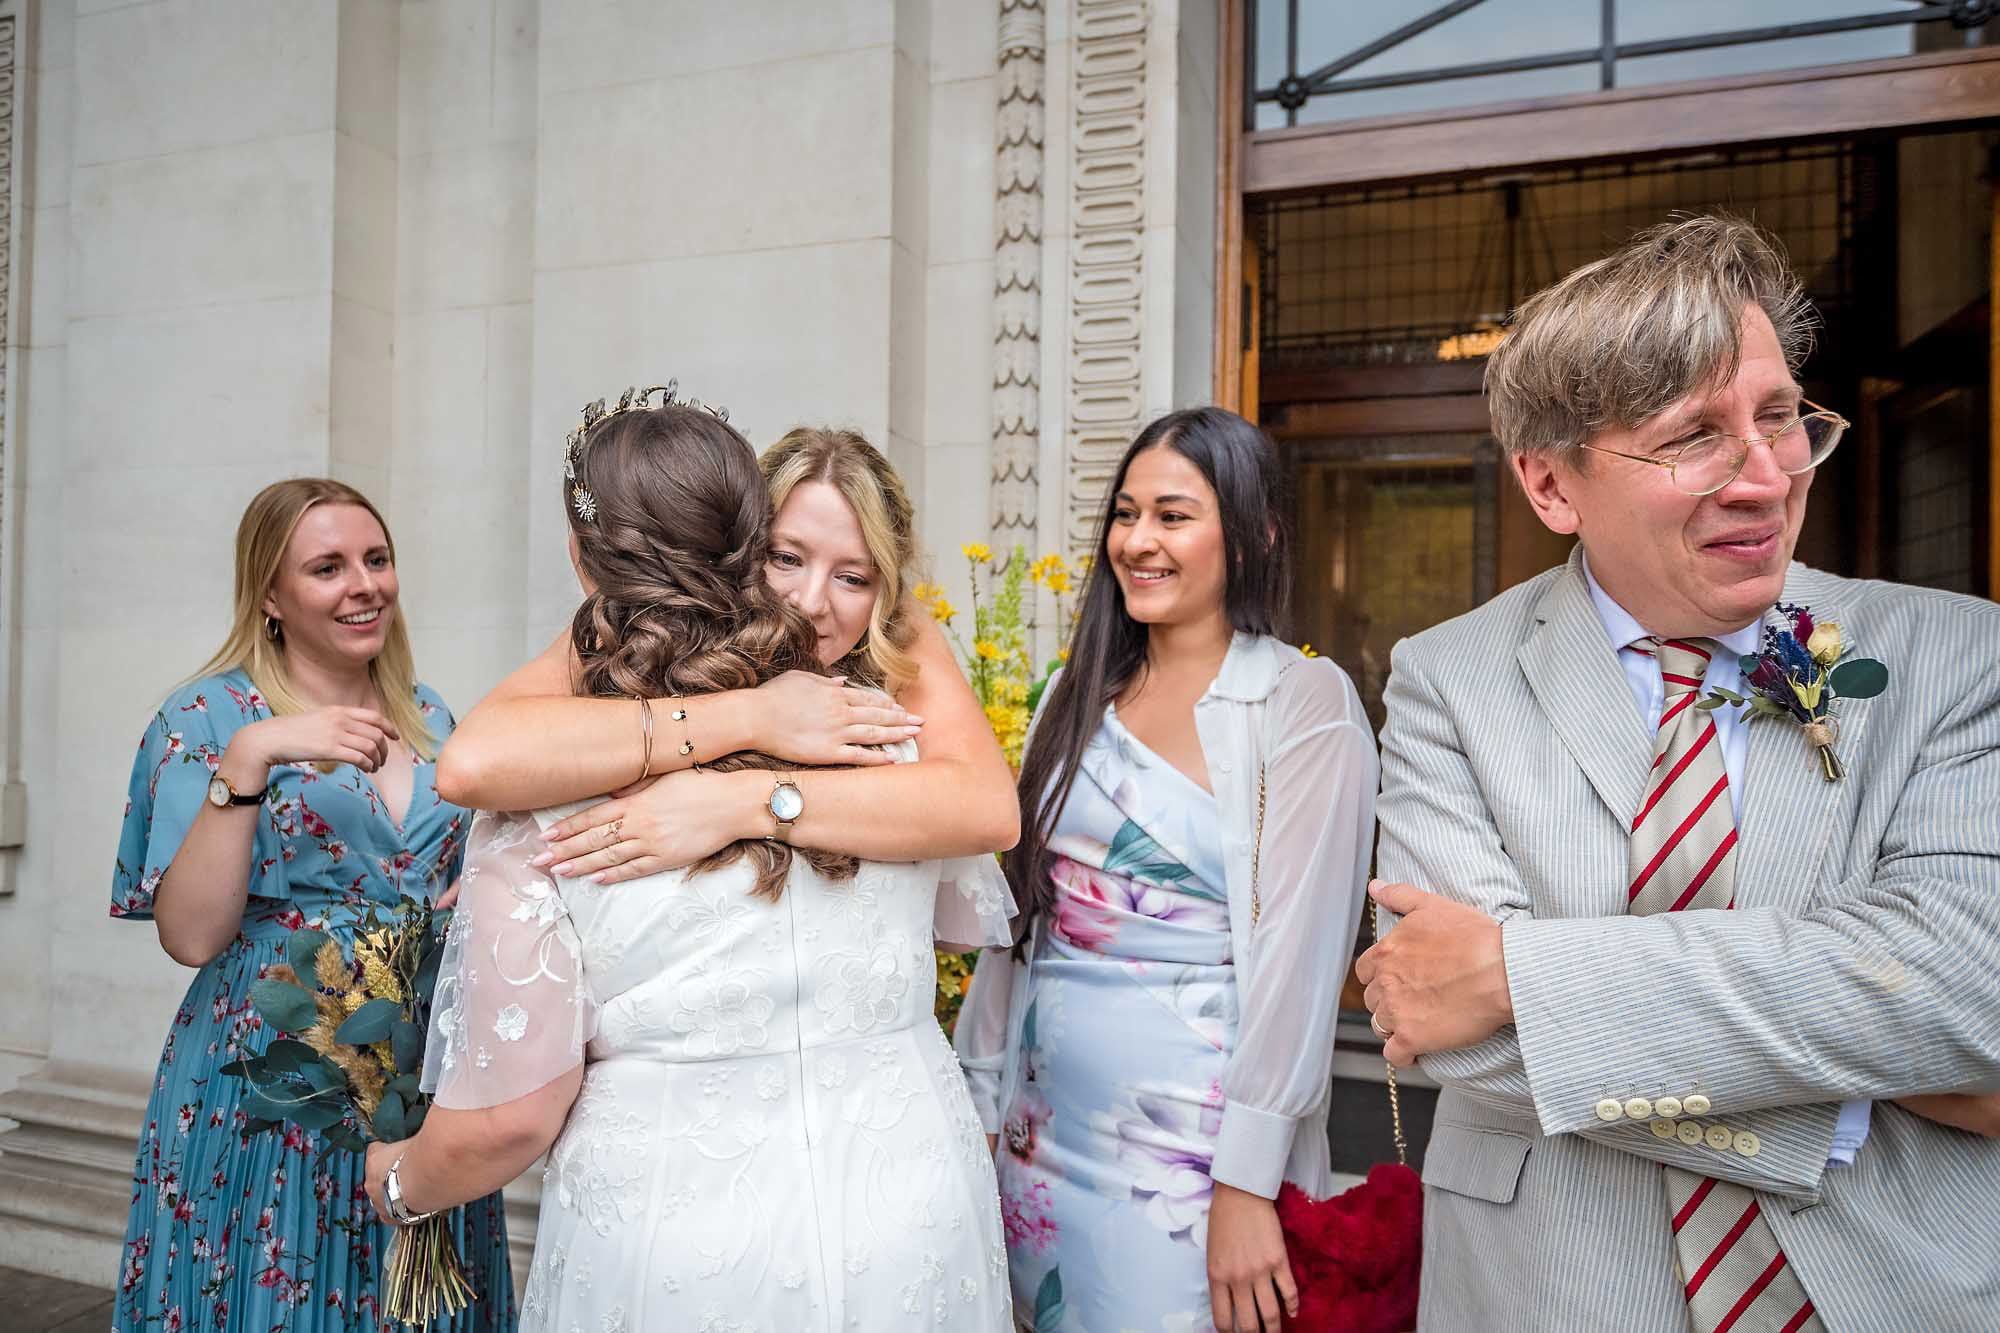 Female guests hugs the bride outside Old Marylebone Town Hall as other guests watch on